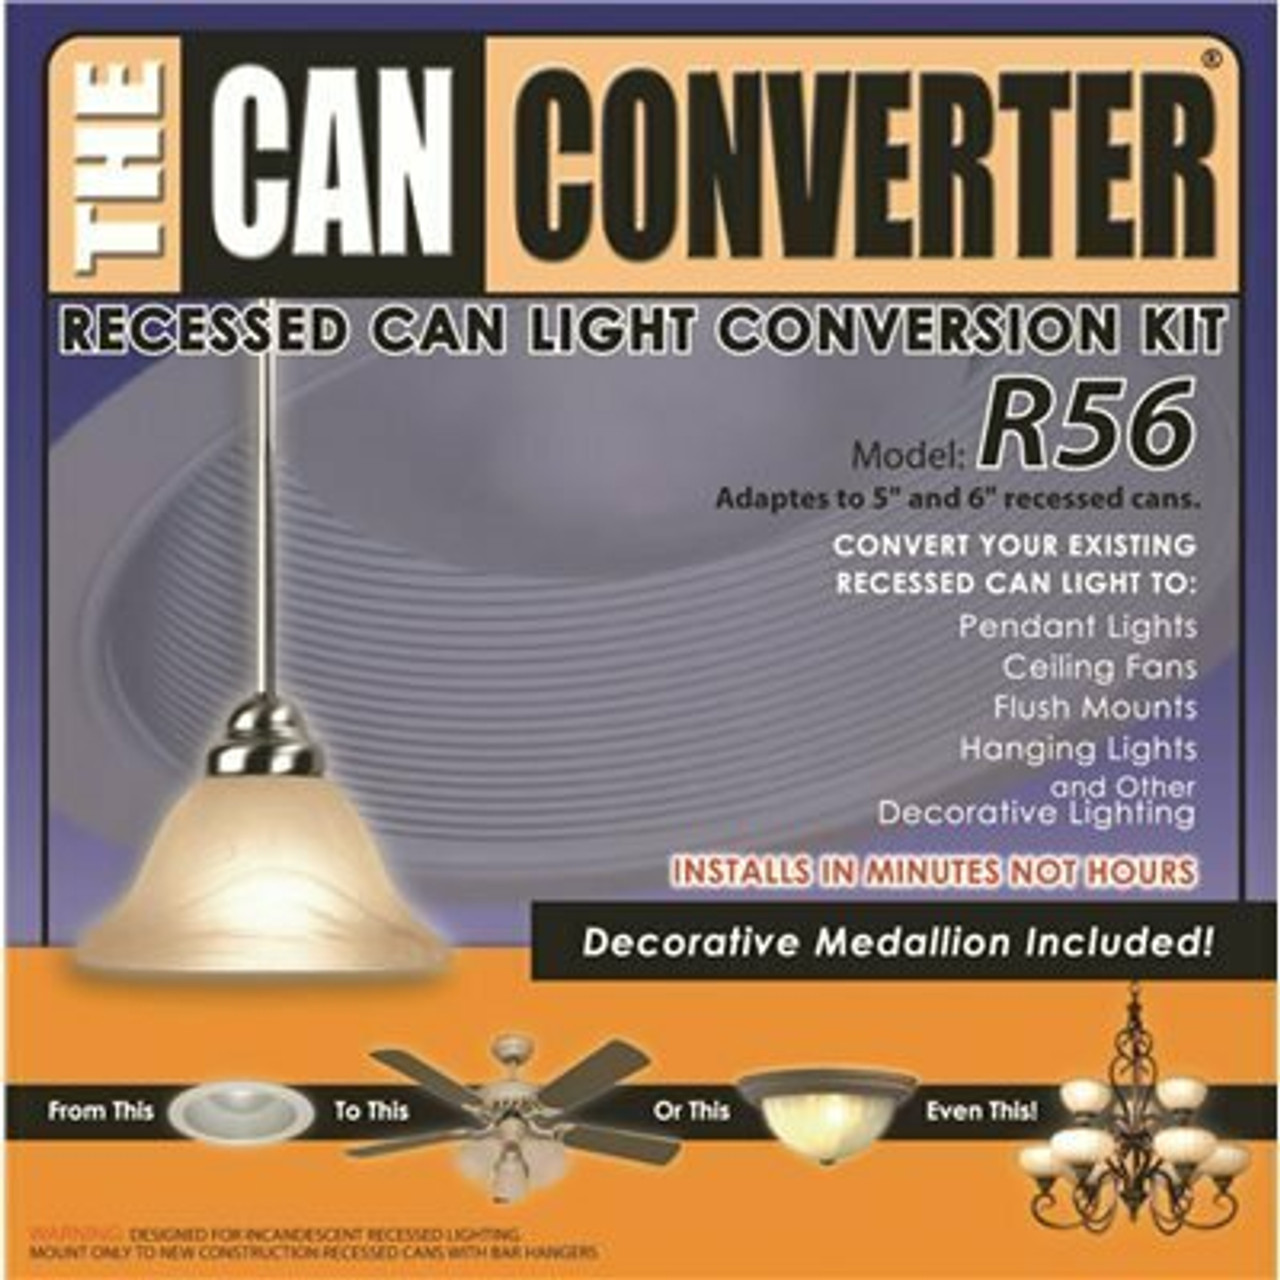 Jsb Enterprises The Can Converter Recessed Can Conversion Kit With Standard White Medallion, 5 In. & 6 In.